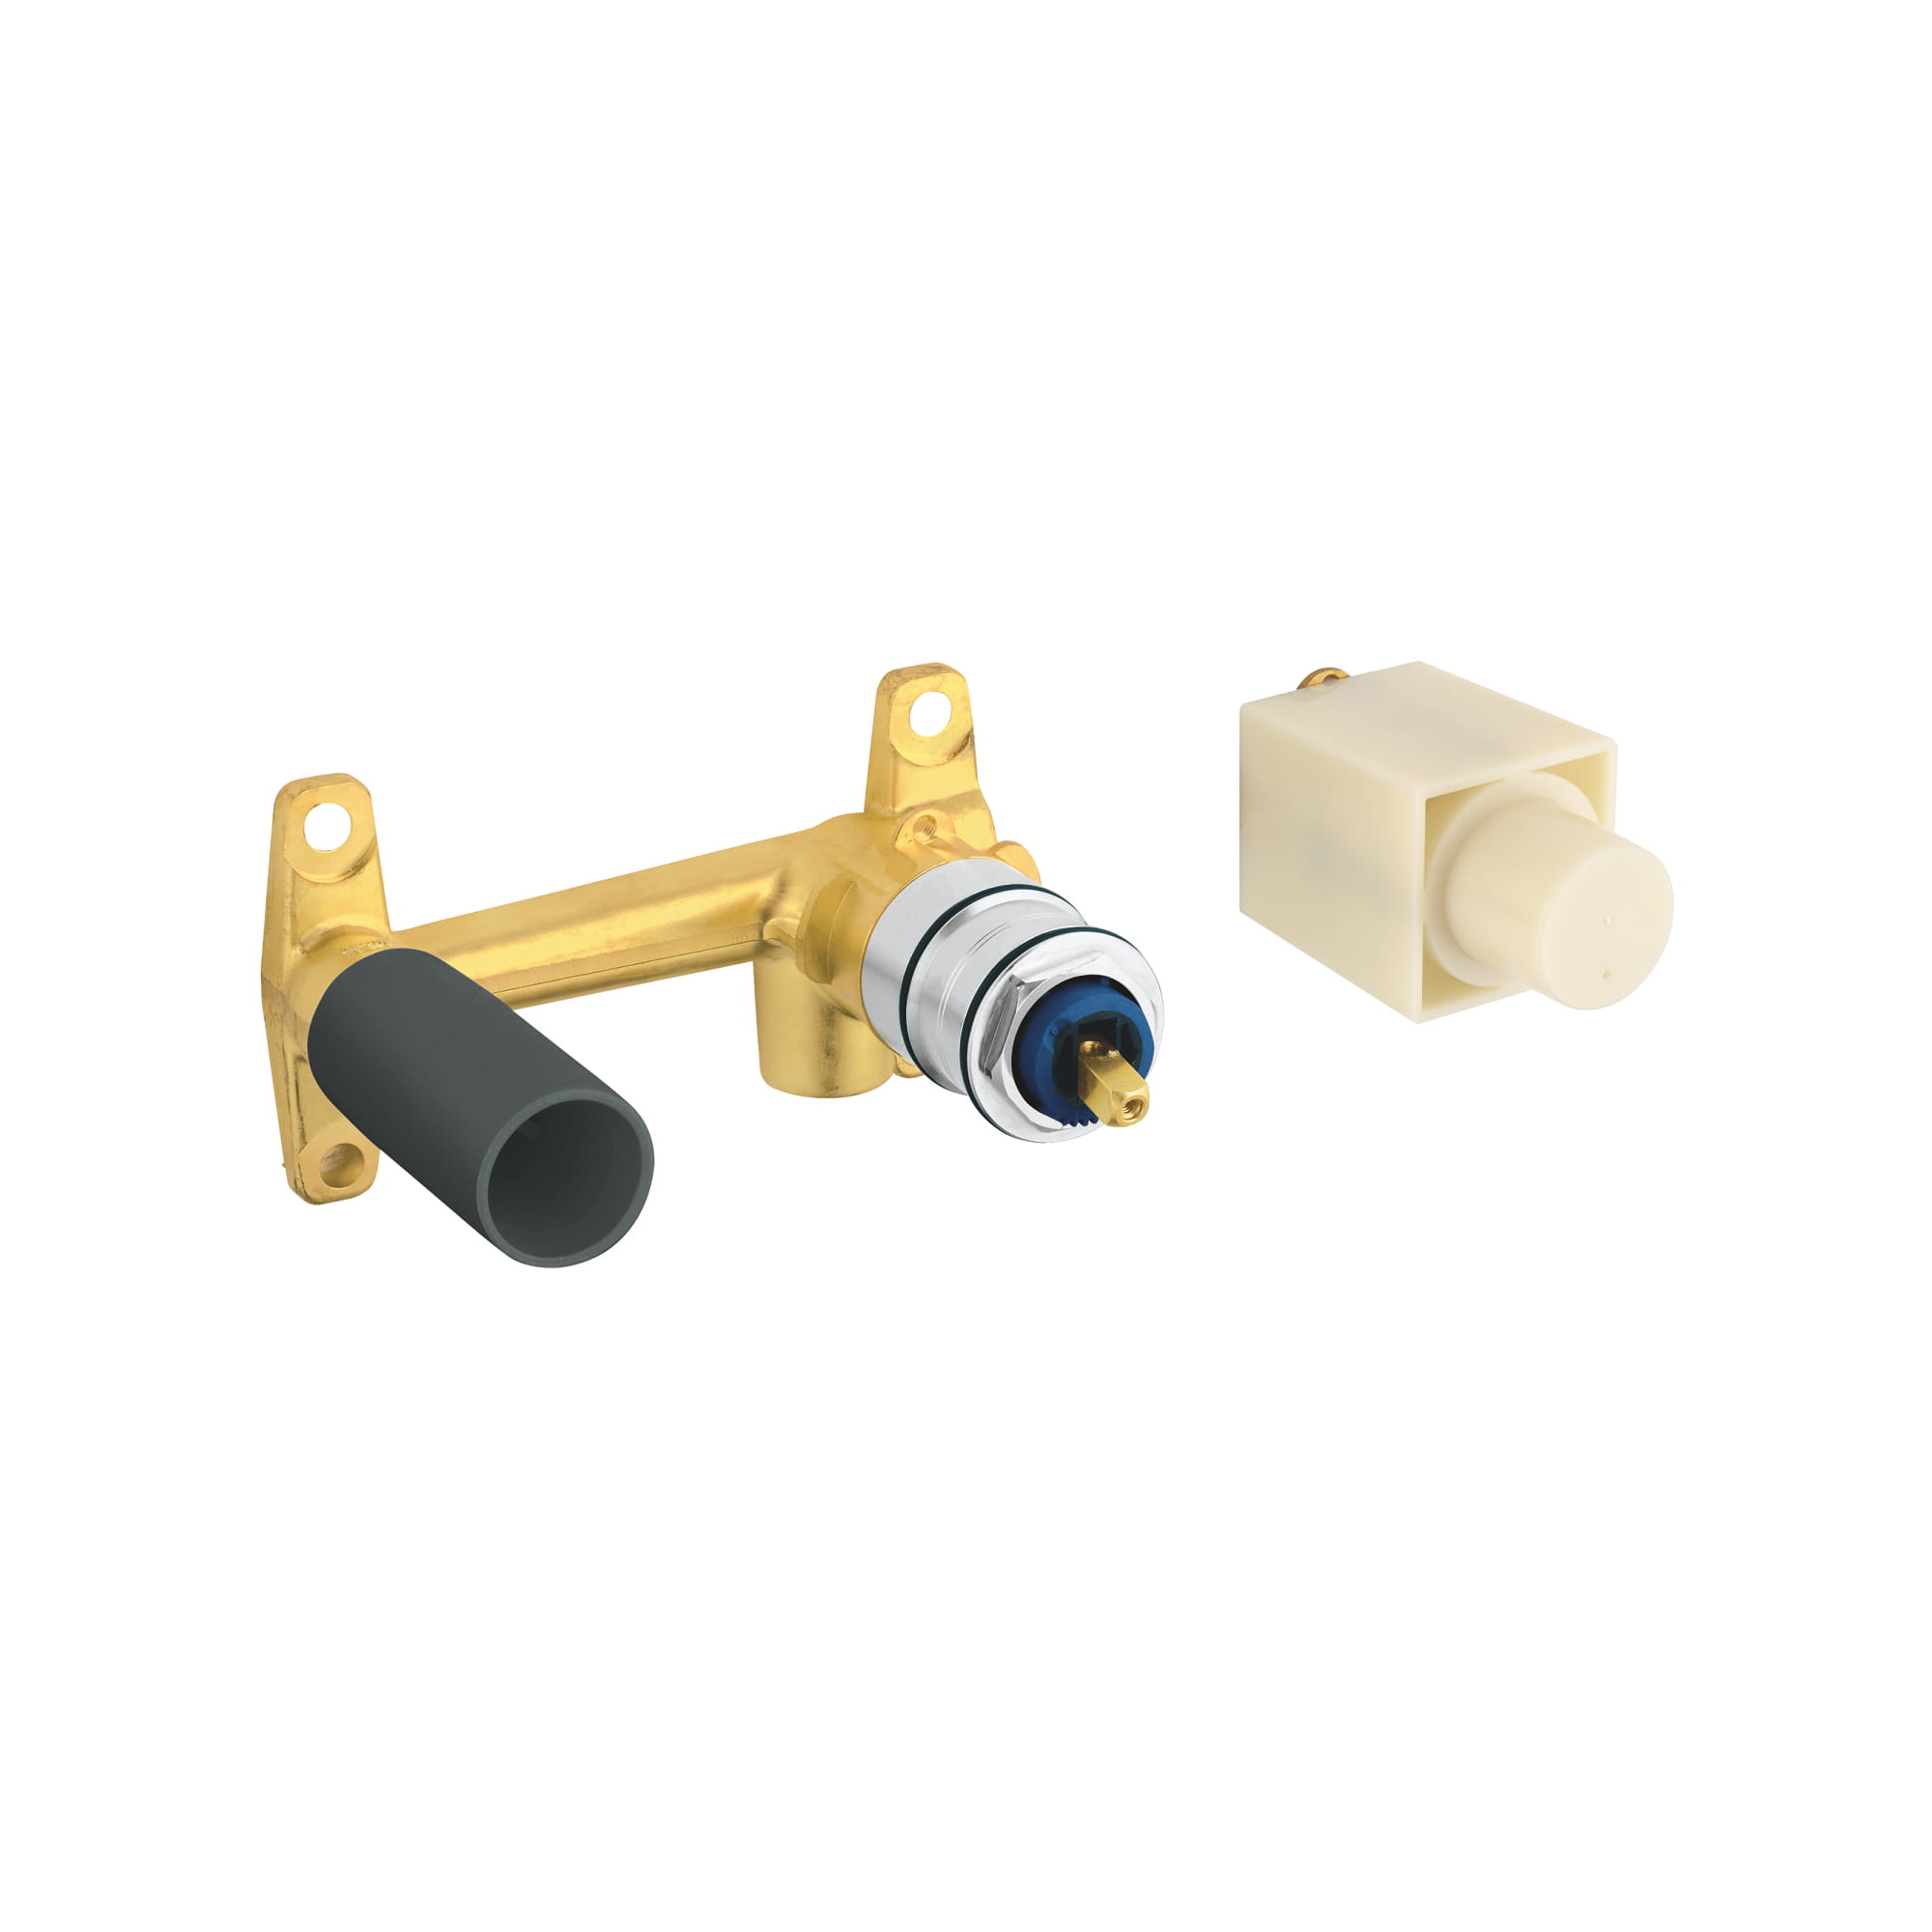 2-Hole Wall Mount Faucet Rough-In Valve